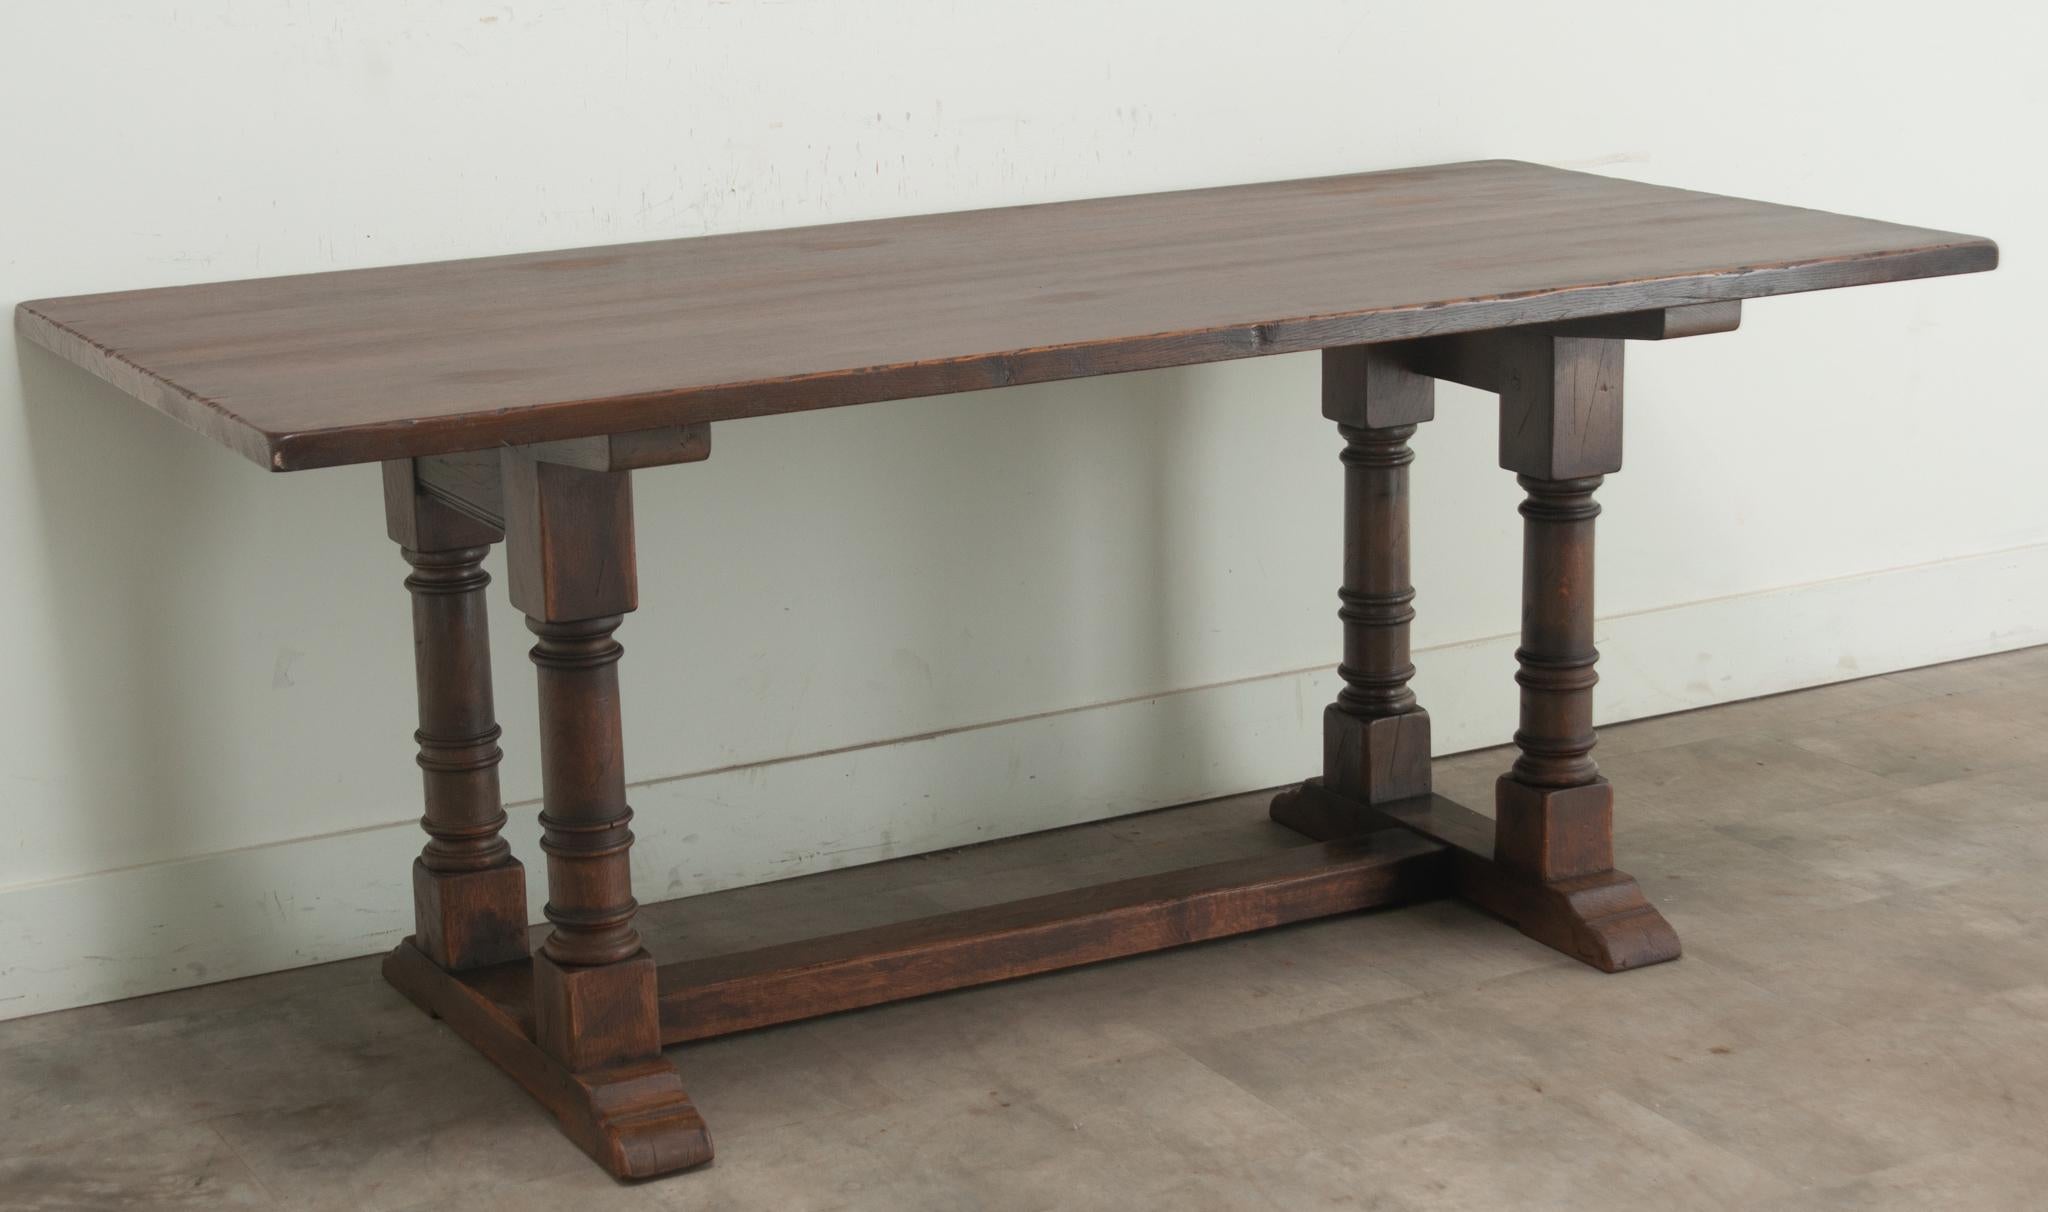 A vintage oak dining table from the Netherlands. This 1 ¼” thick single board table top rests over a trestle base composed of two turned baluster legs joined by a wide stretcher and base. This table has recently been cleaned and polished with a